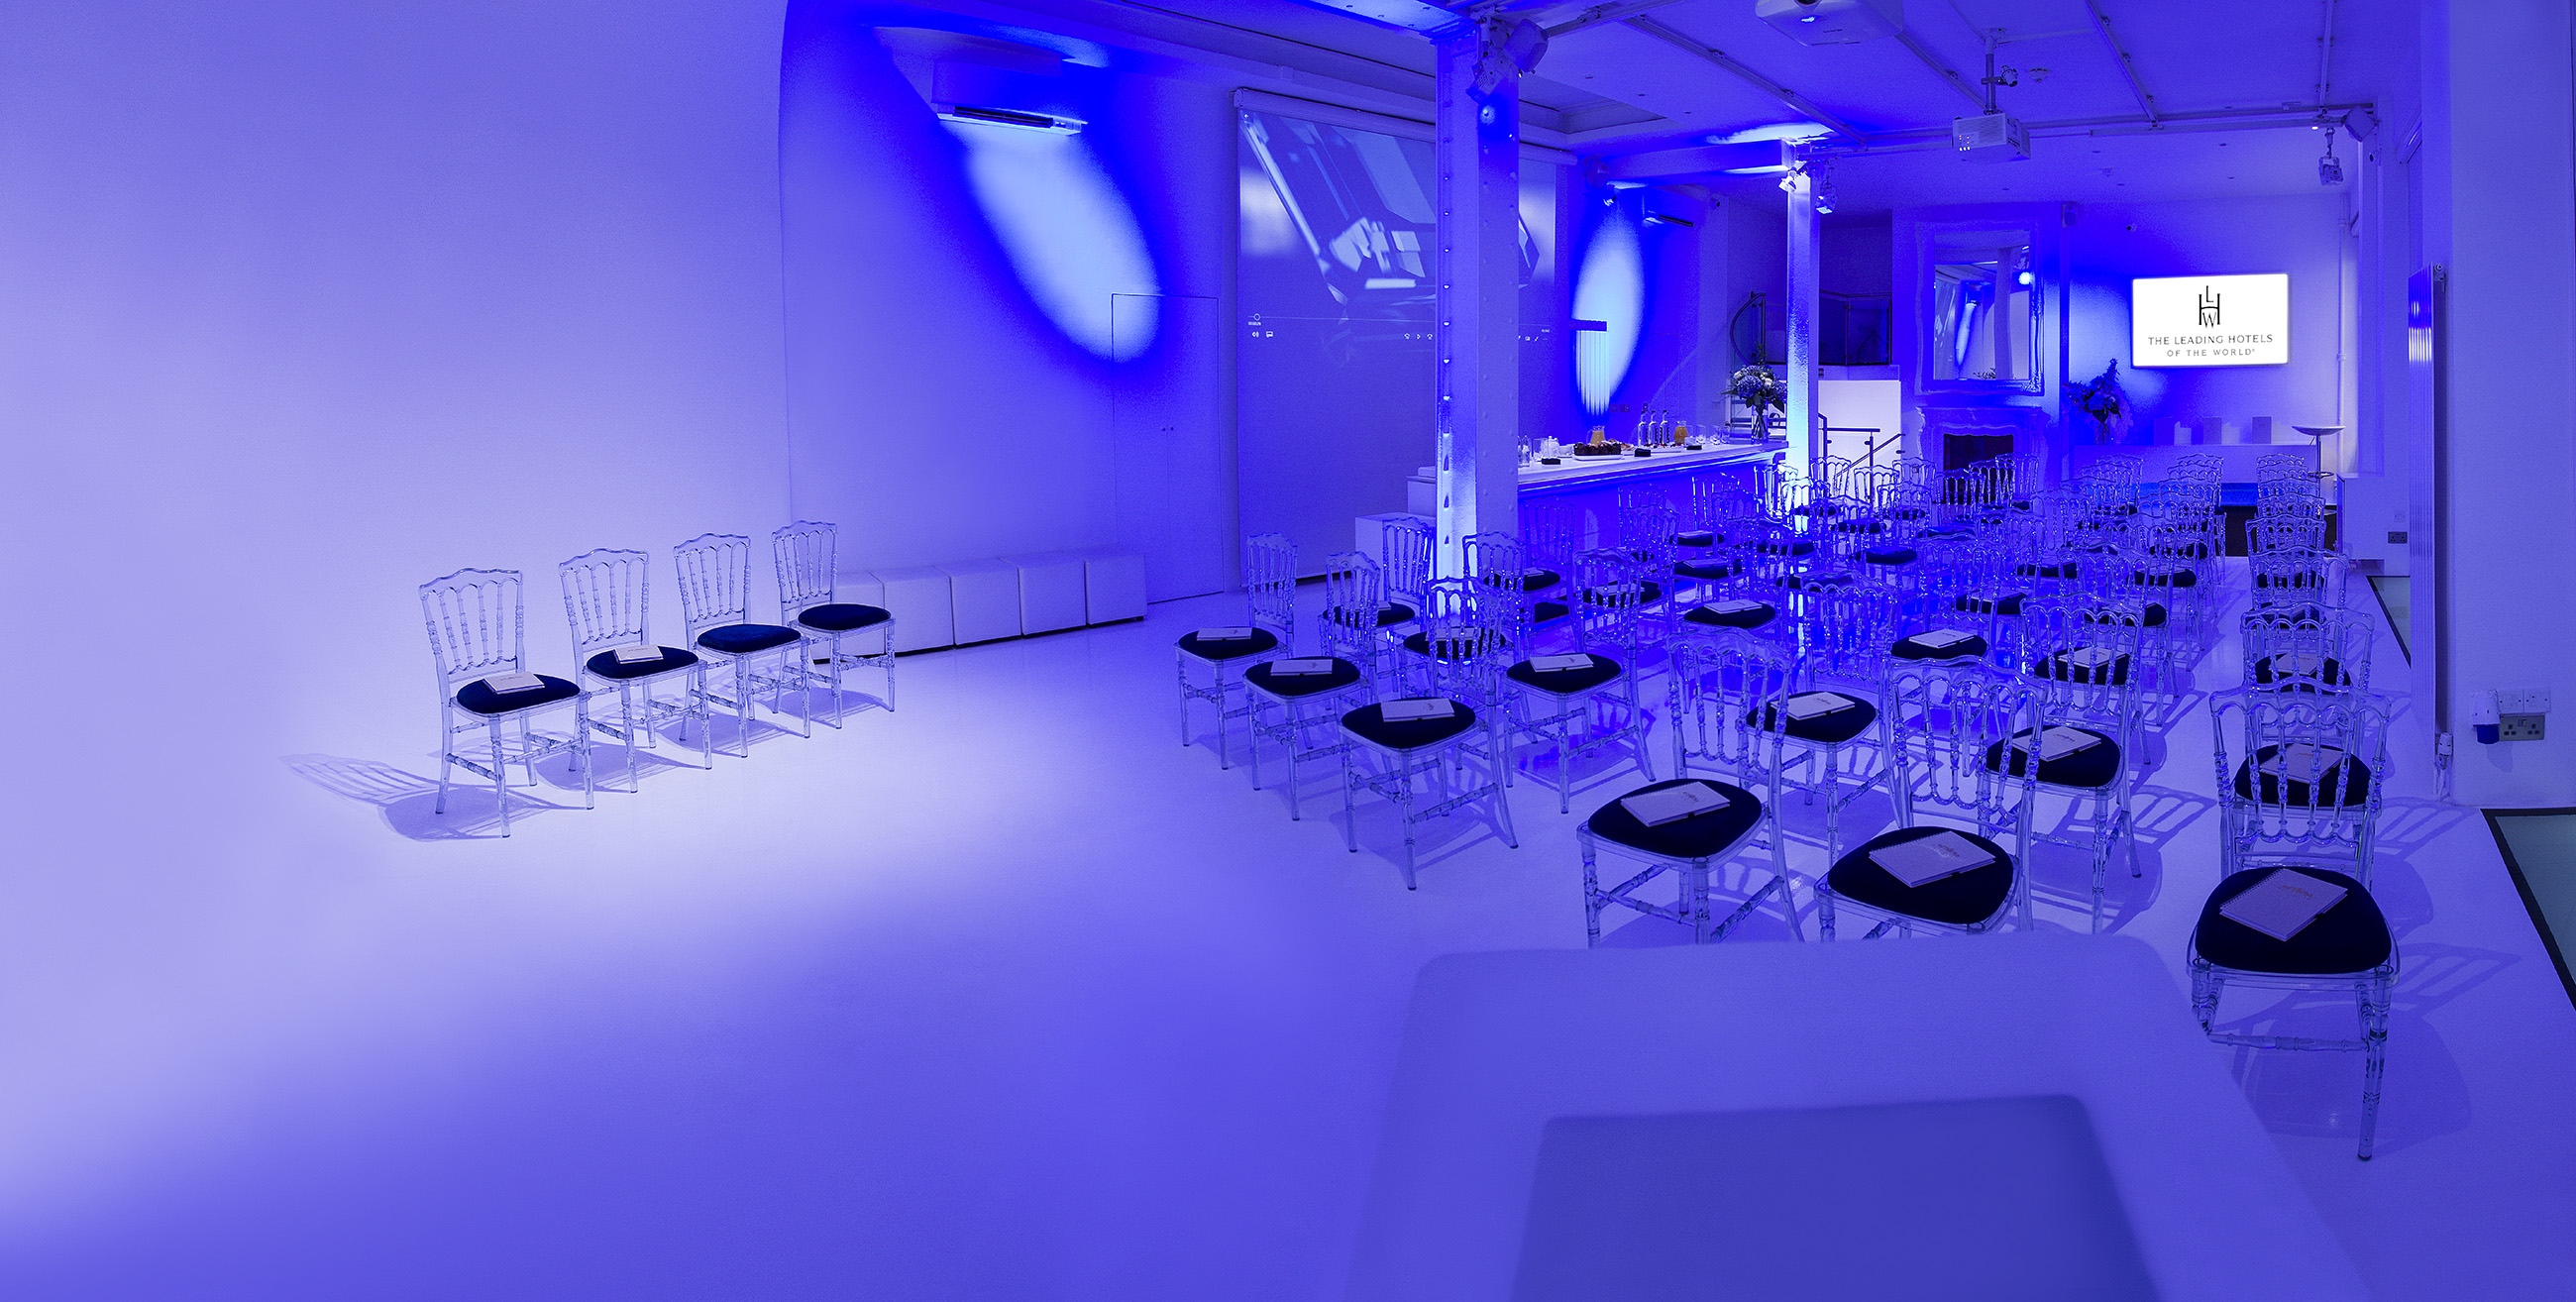 Covent Garden meeting and conferences space Voted London’s most popular blank canvas event venue